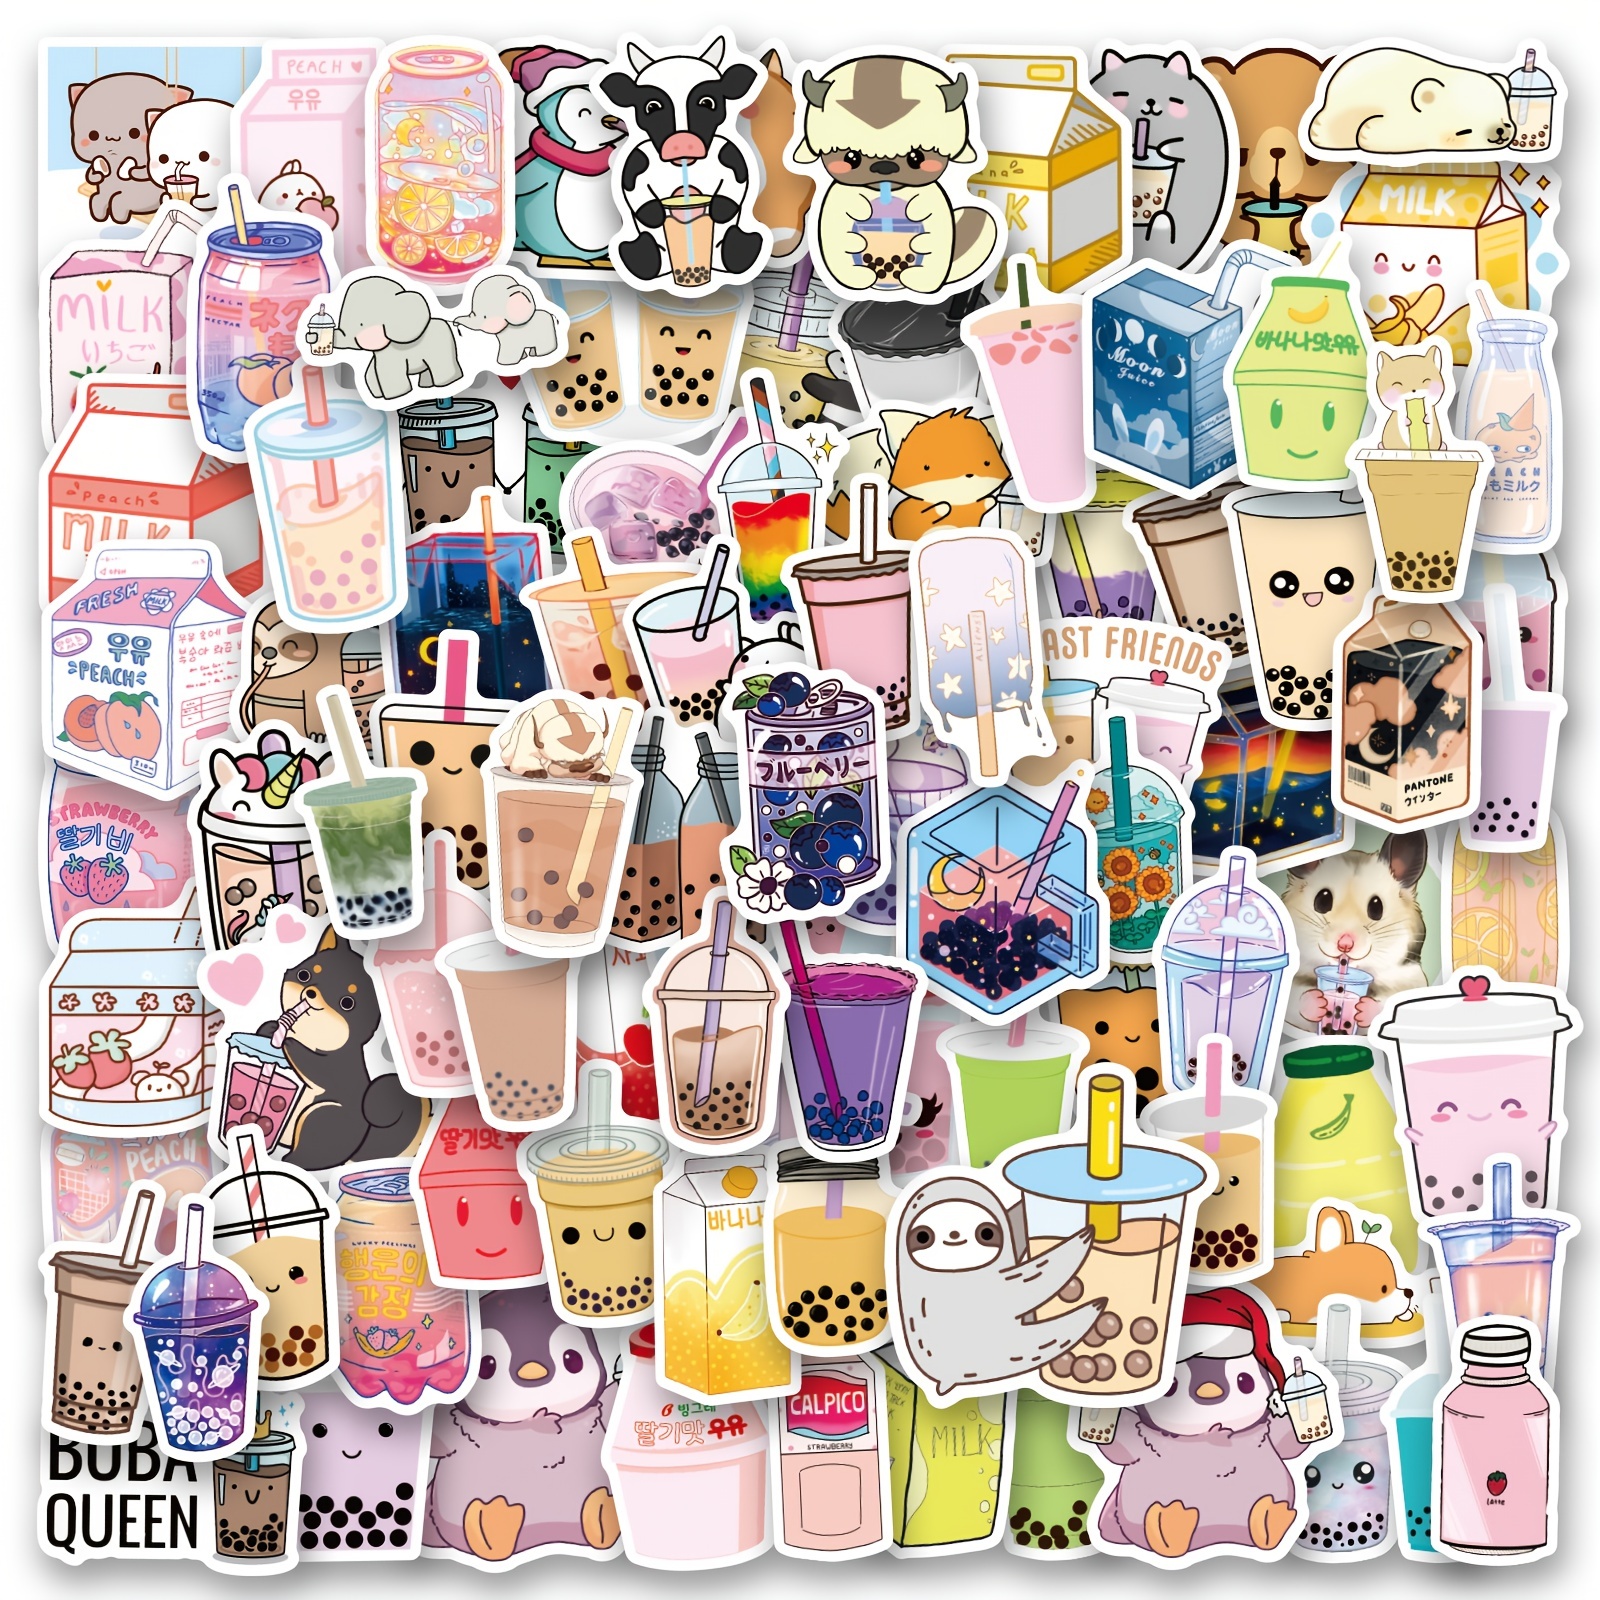 60pcs Funny Face Expression Stickers Pack Laptop Bottle Cup